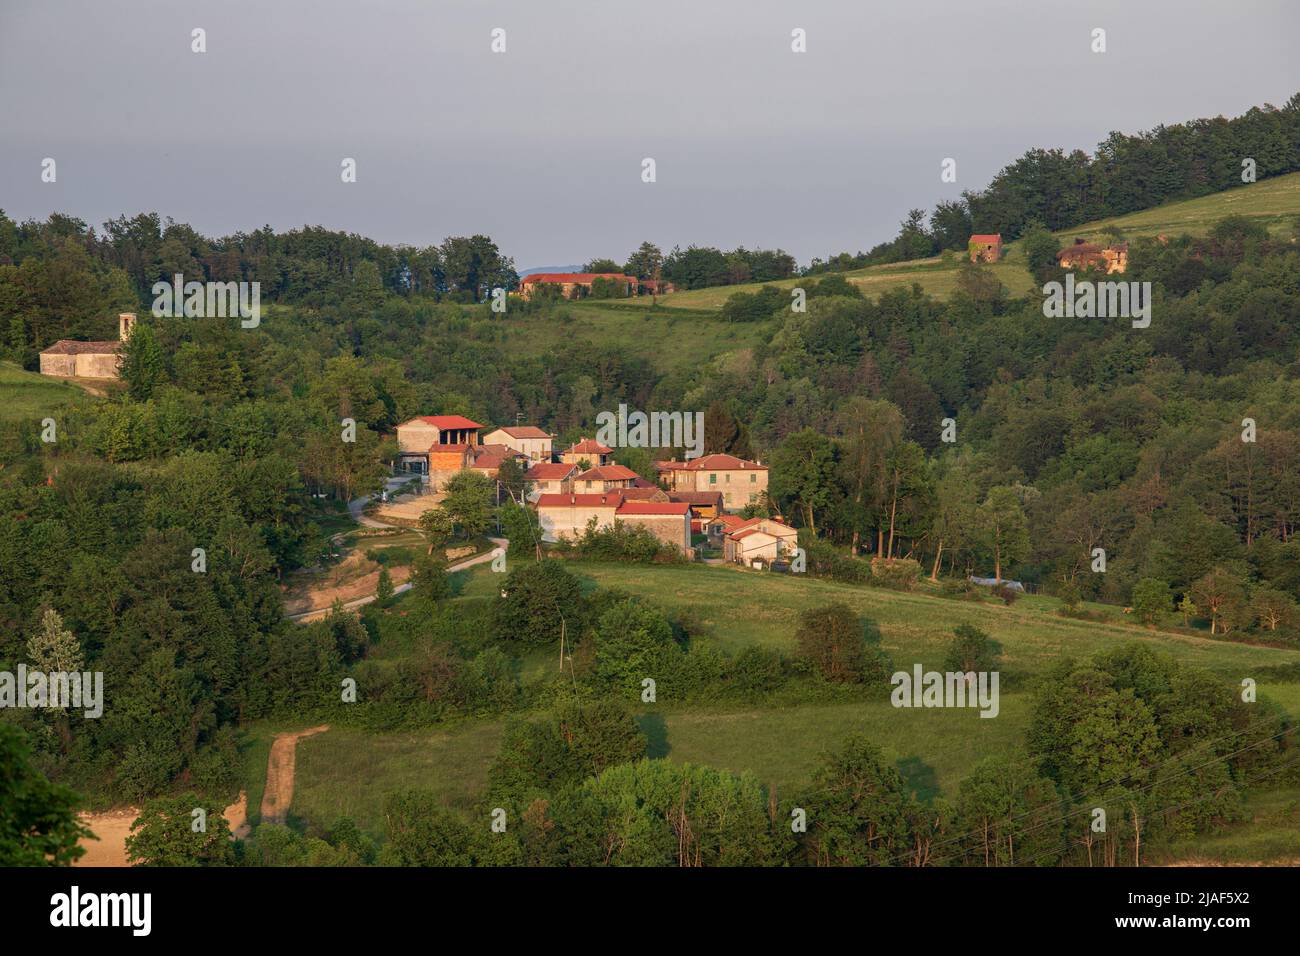 View on the village Passioto, in the Mombarcaro area, Piedmonte, Italy Stock Photo